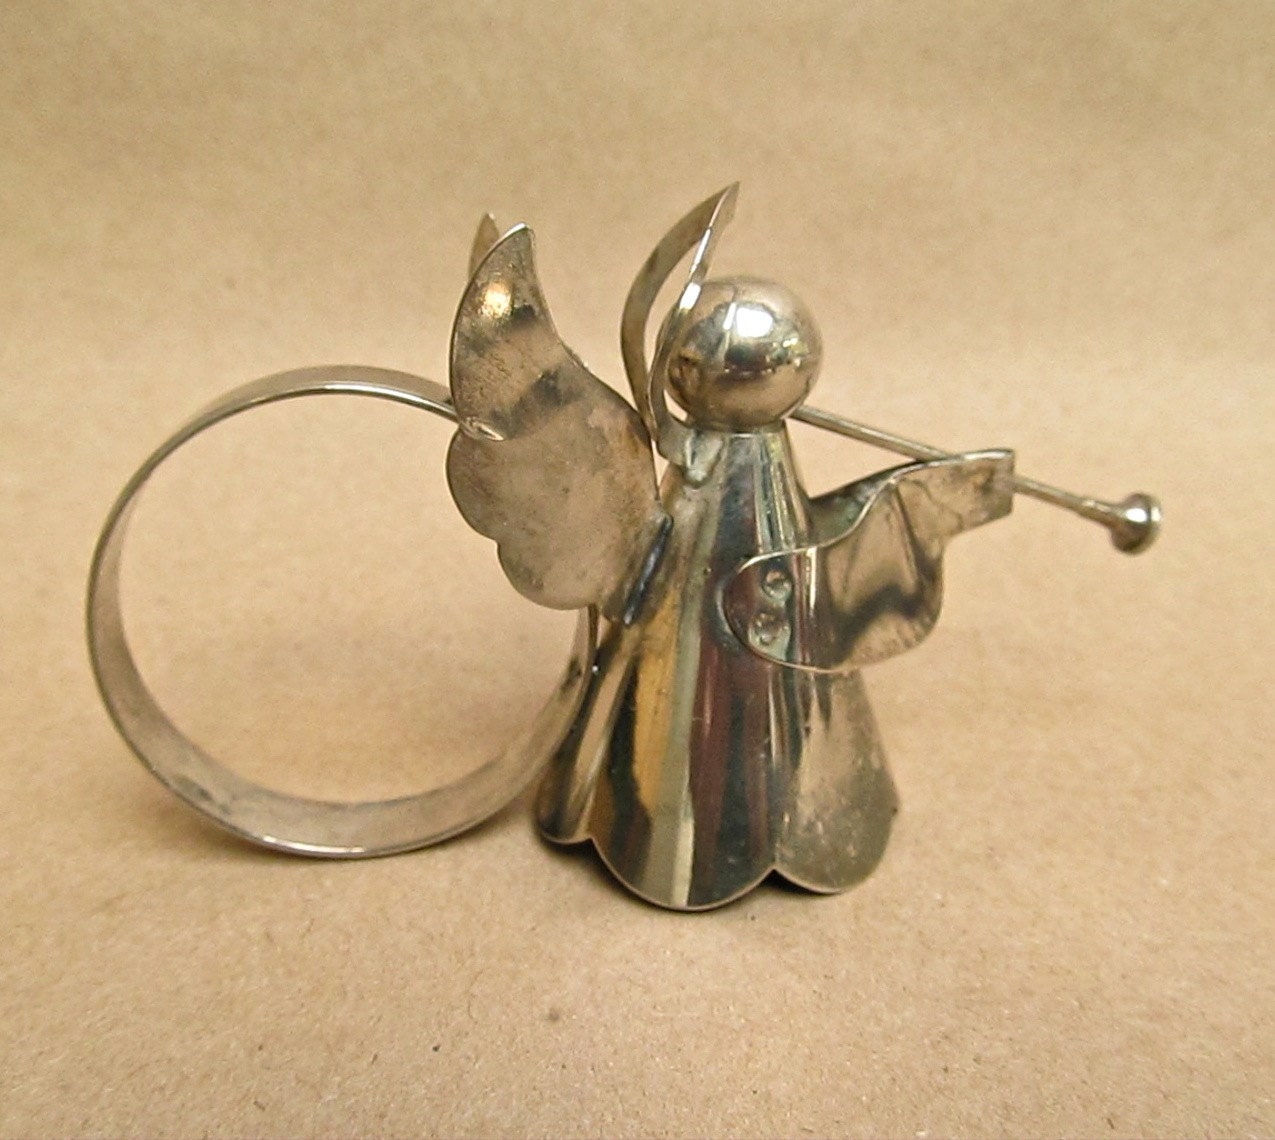 Four Silver Plated Angel Napkin Rings by YBINUCAROL on Etsy